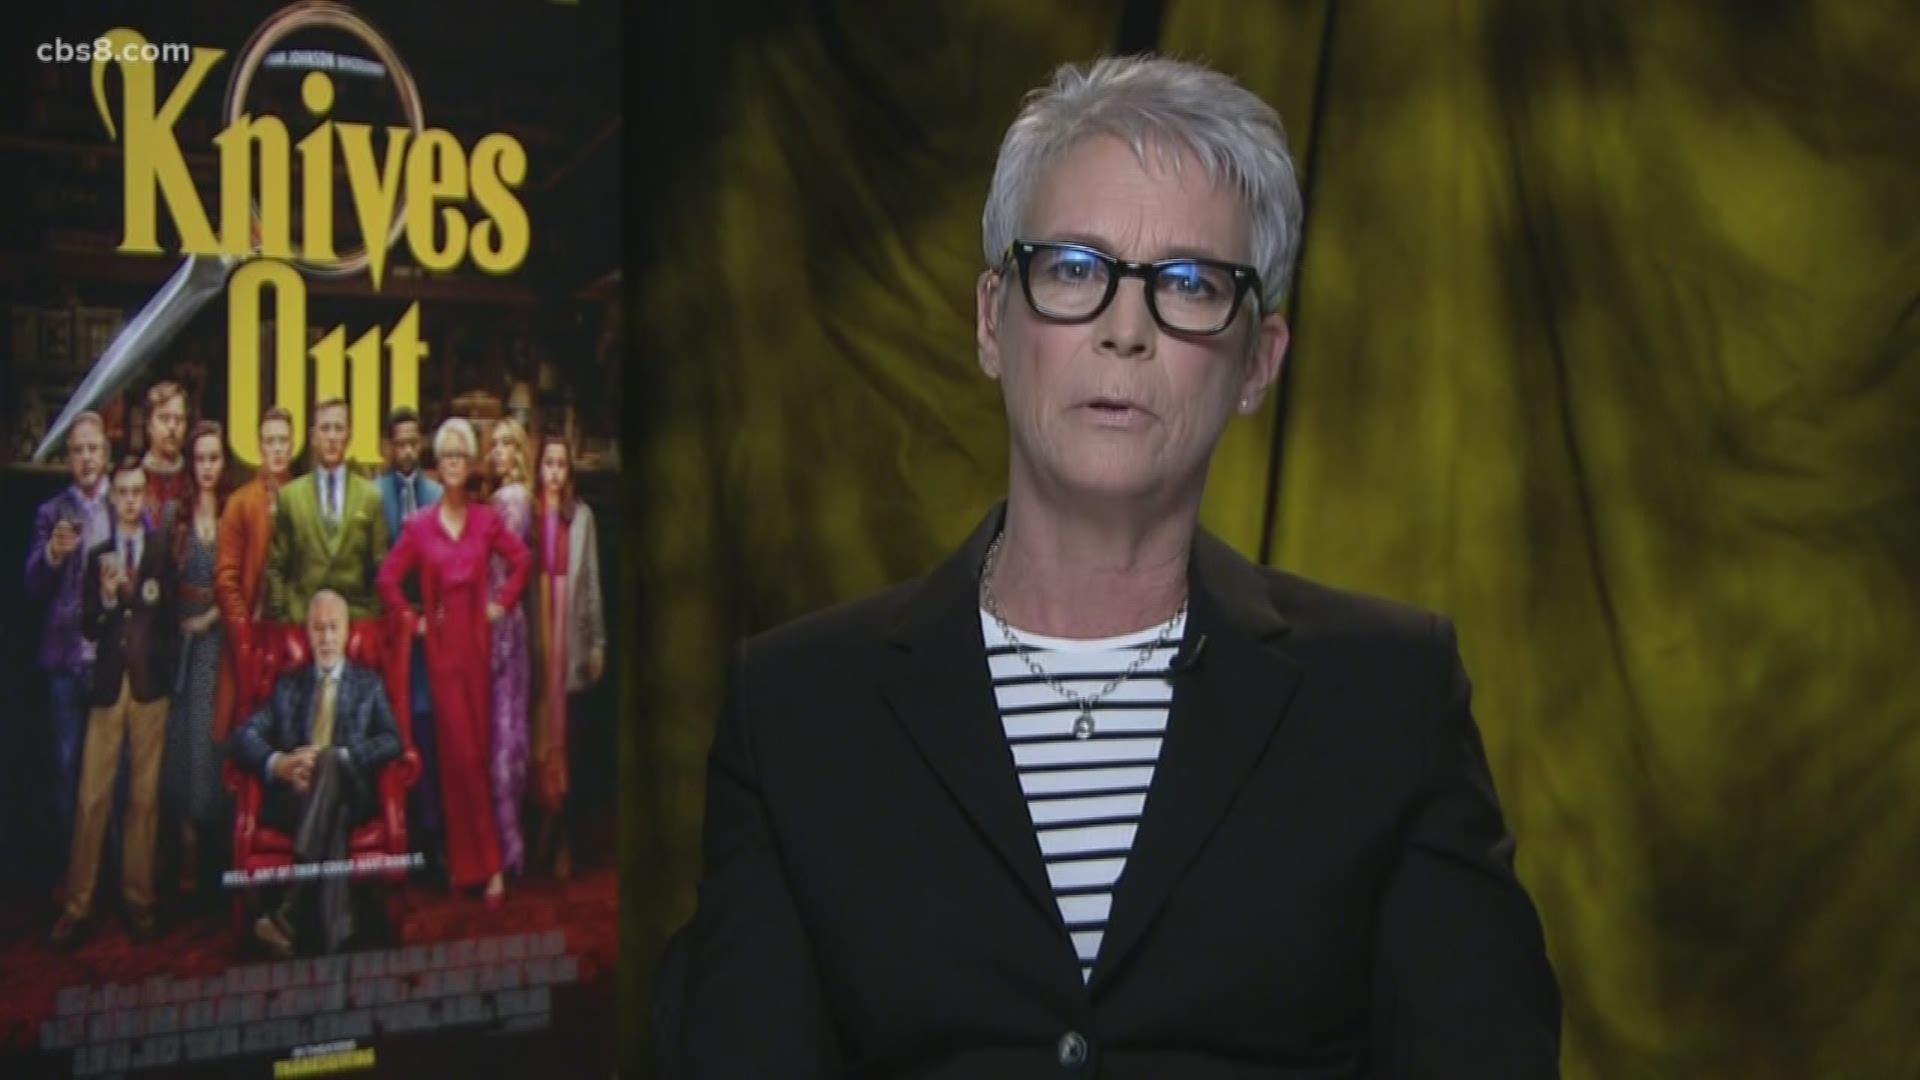 Jamie Lee Curtis joins a star-studded cast in Knives Out 